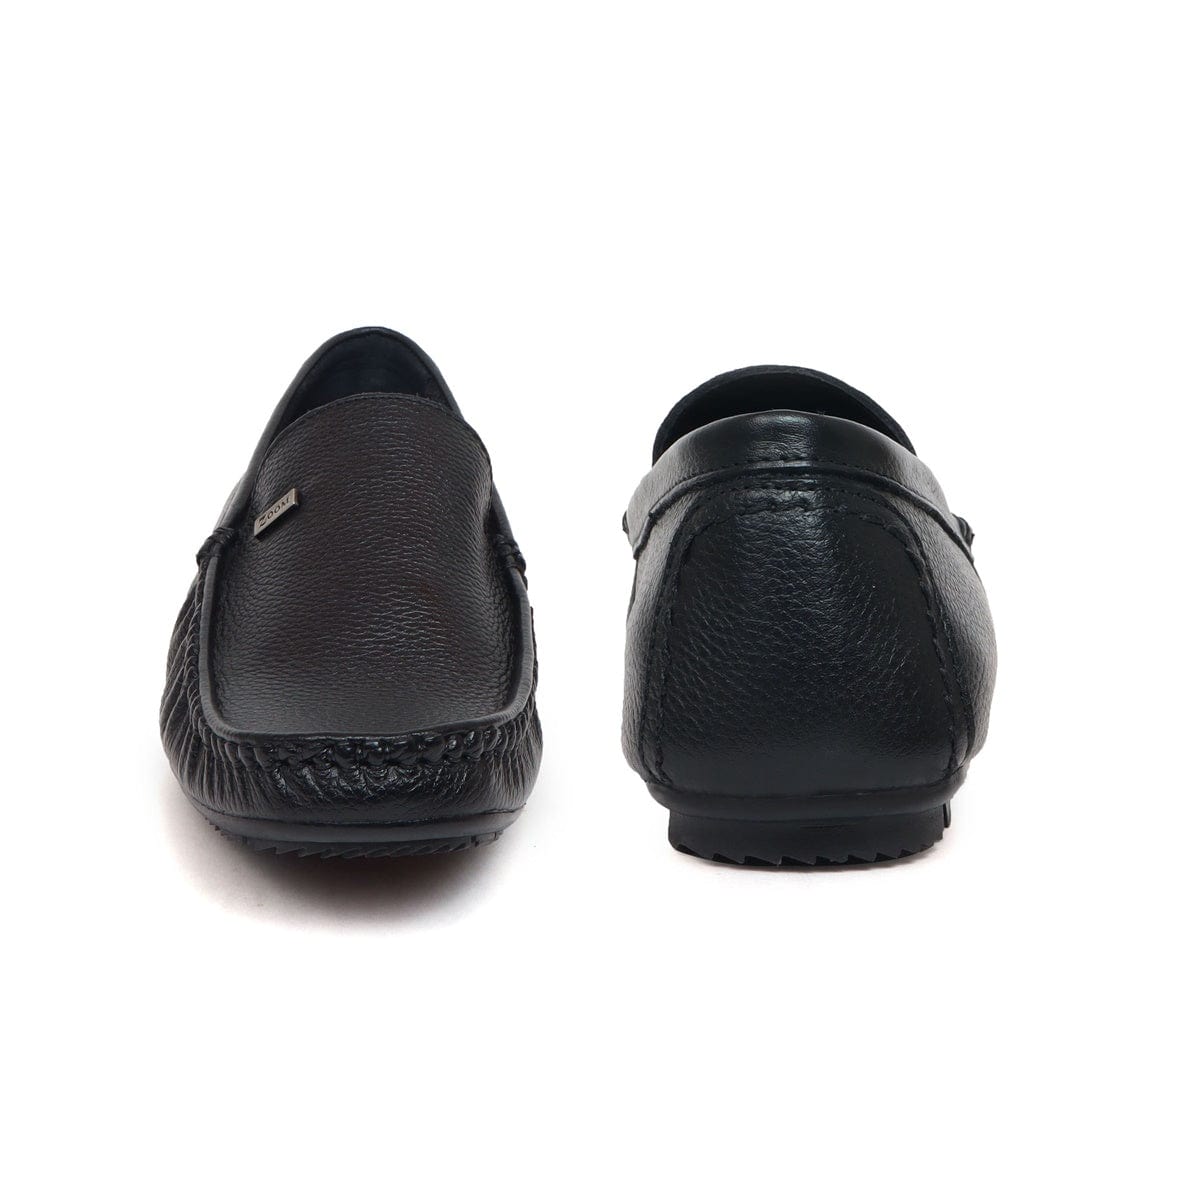 casual black loafers for men bt-16_1